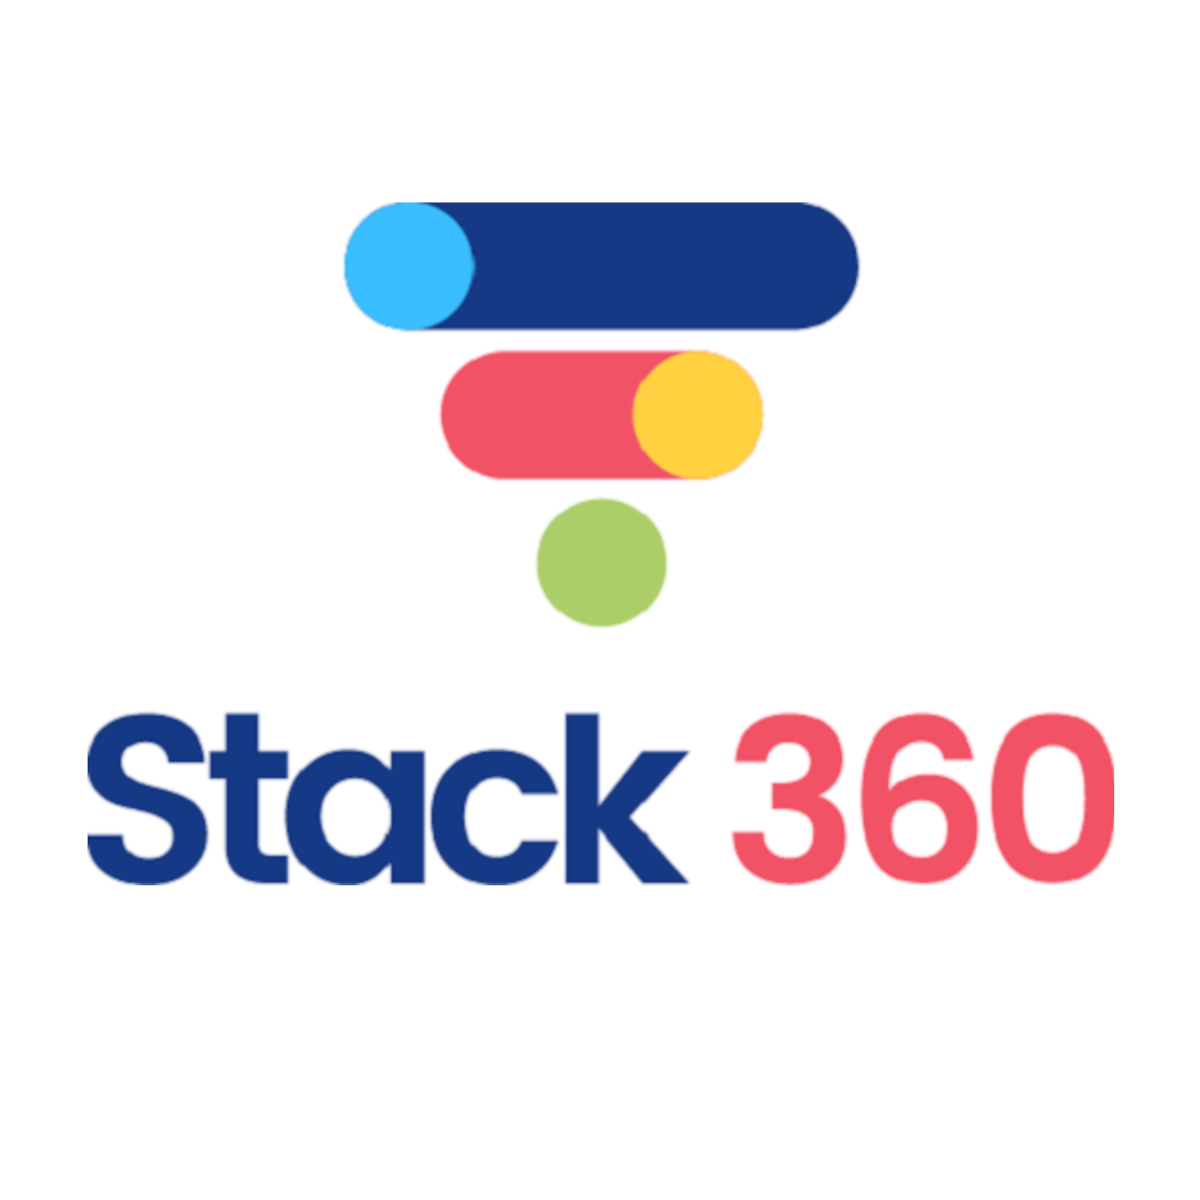 Stack 360